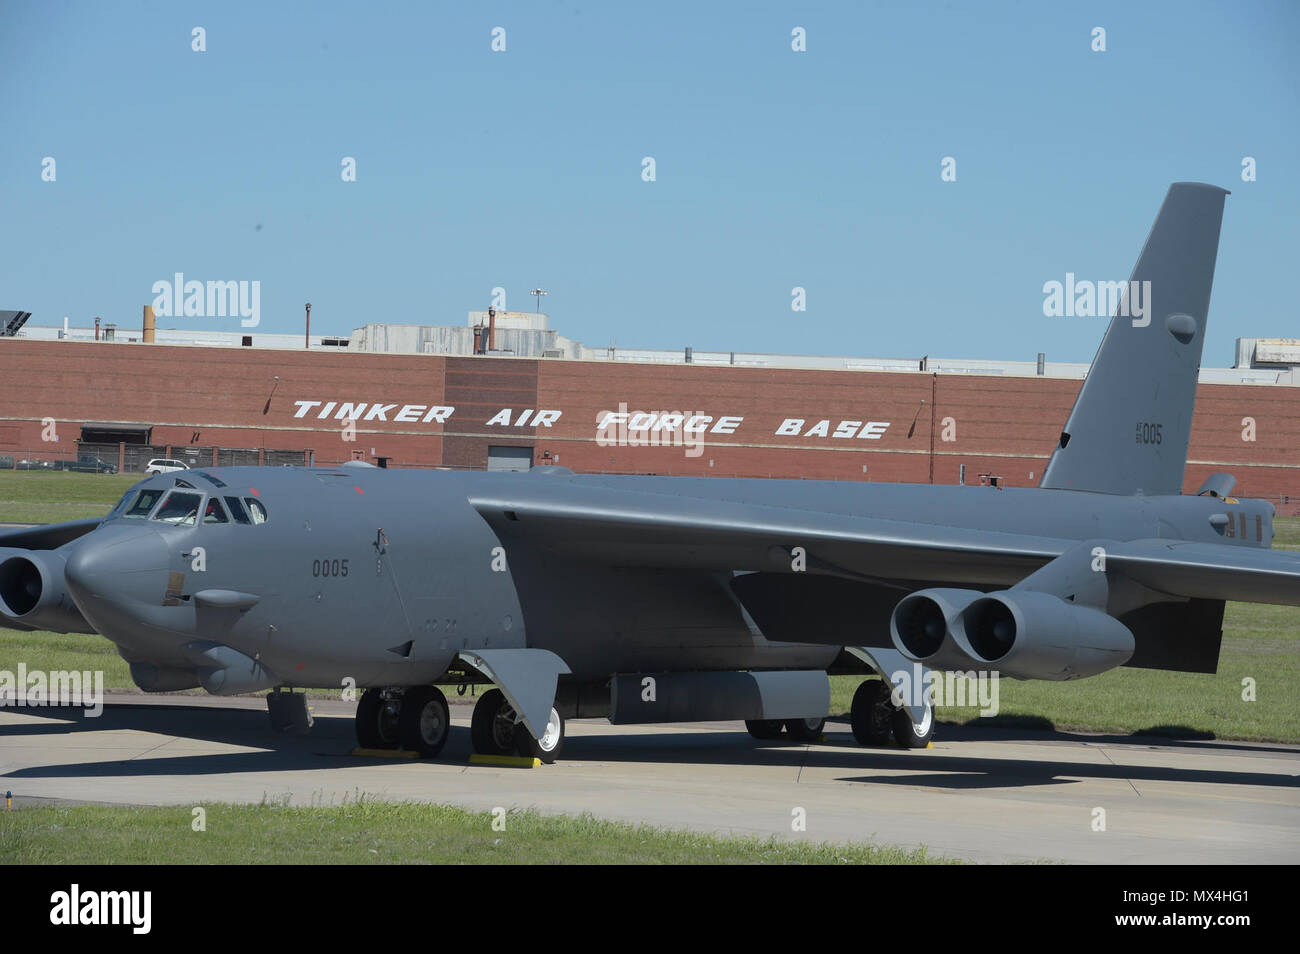 Boeing B-52H, 60-0005, poses in front of Oklahoma City Air Logistics Complex Bldg. 3001 following major overhaul on May 1, 2017, Tinker Air Force Base, Oklahoma. OC-ALC is responsible for depot level maintenance of the B-52 fleet with a large portion of the work taking place in the building shown behind. Stock Photo